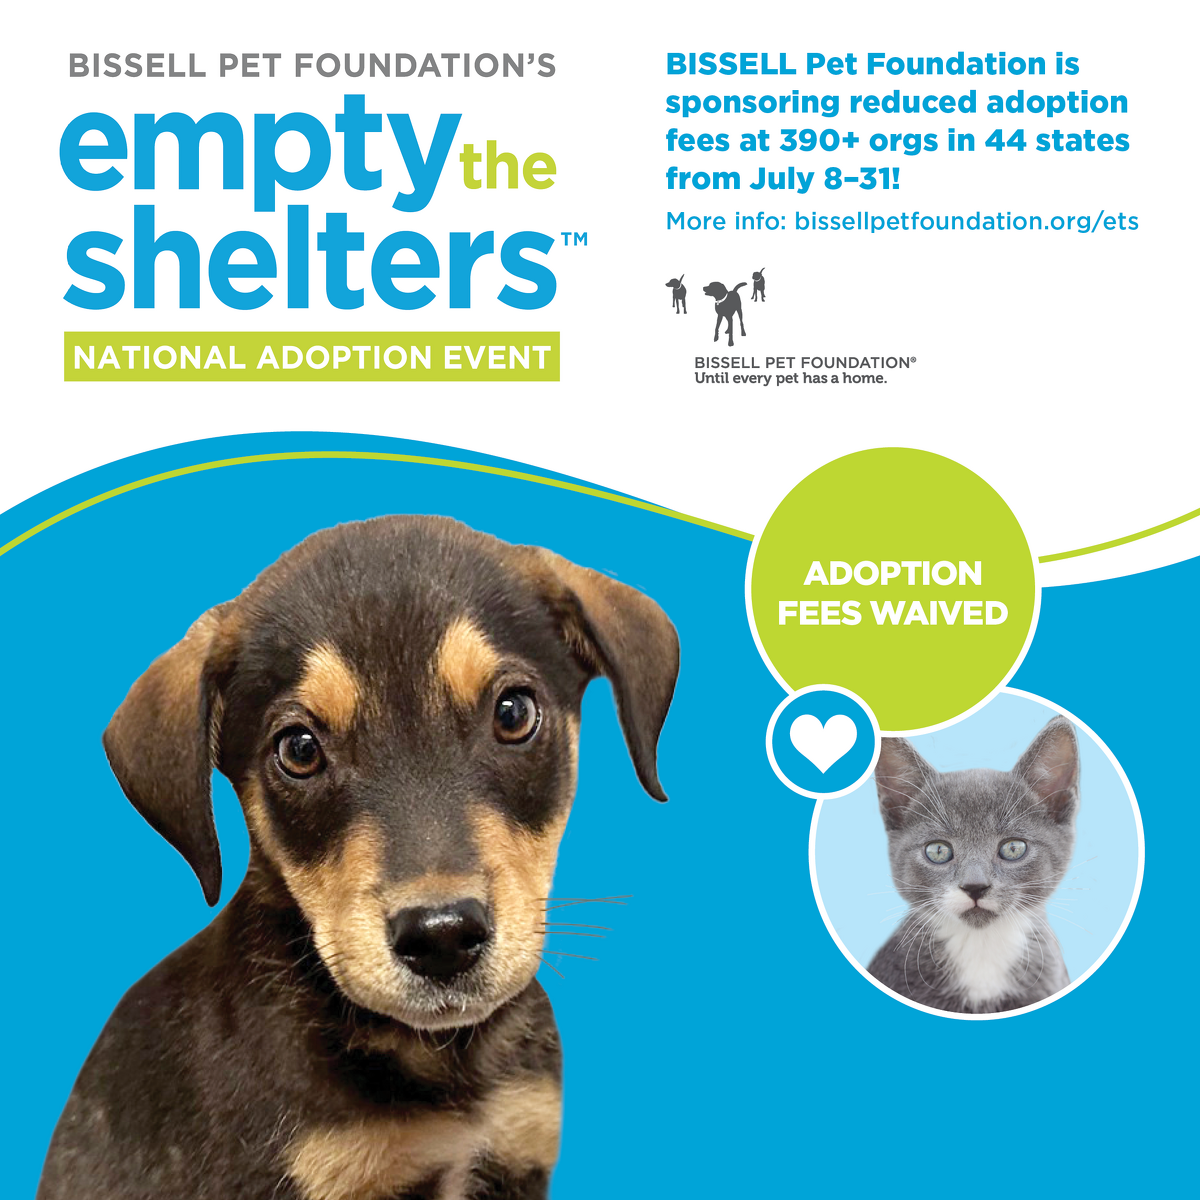 Bissell Pet Foundation's Empty the Shelters